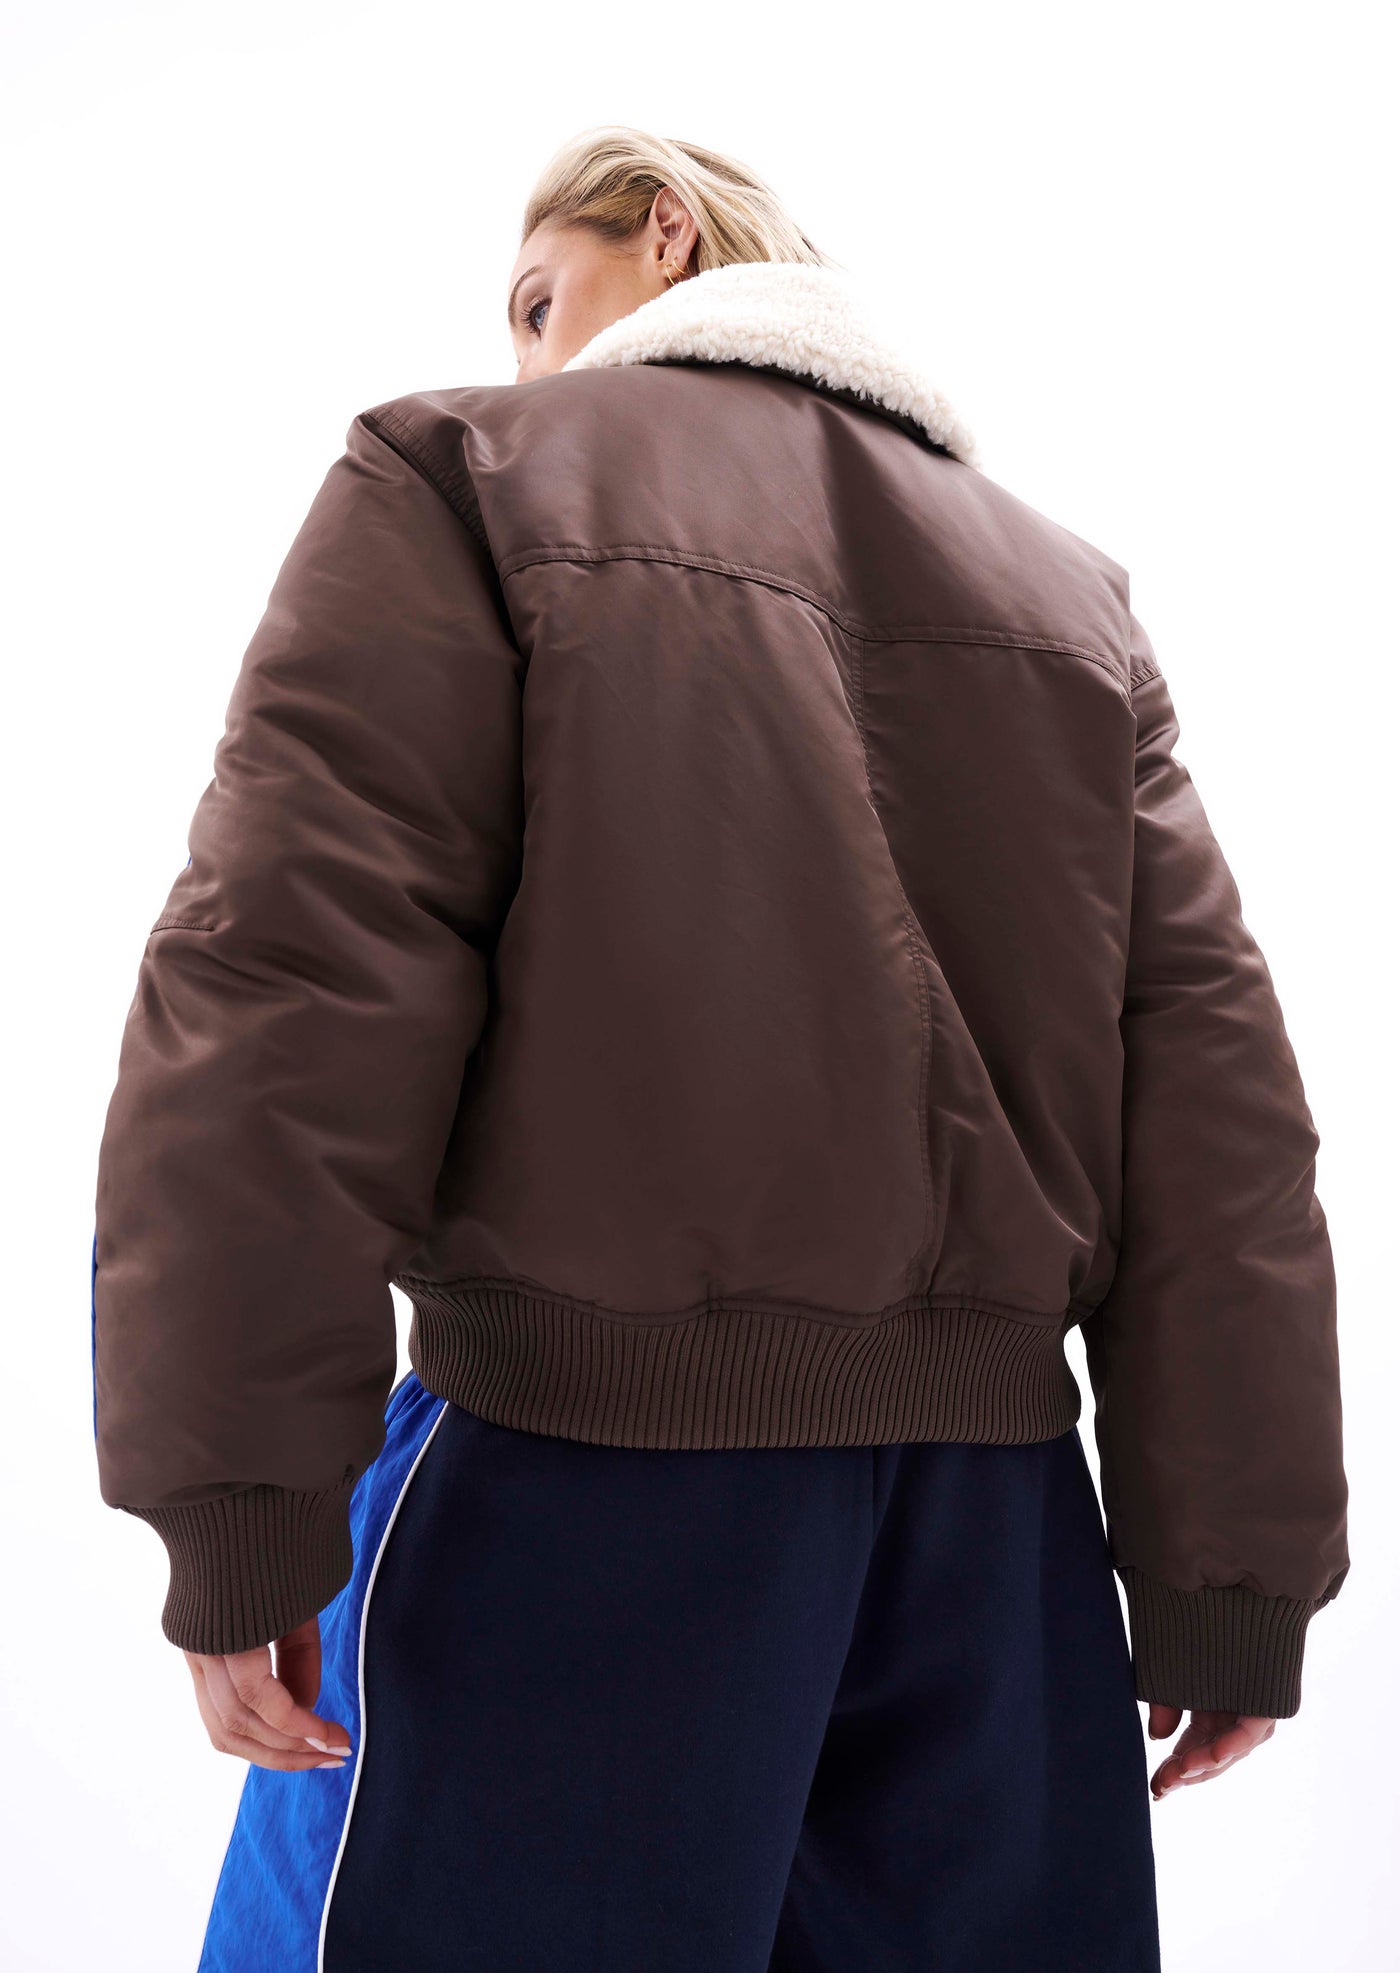 DOUBLE PLAY JACKET IN CHESTNUT